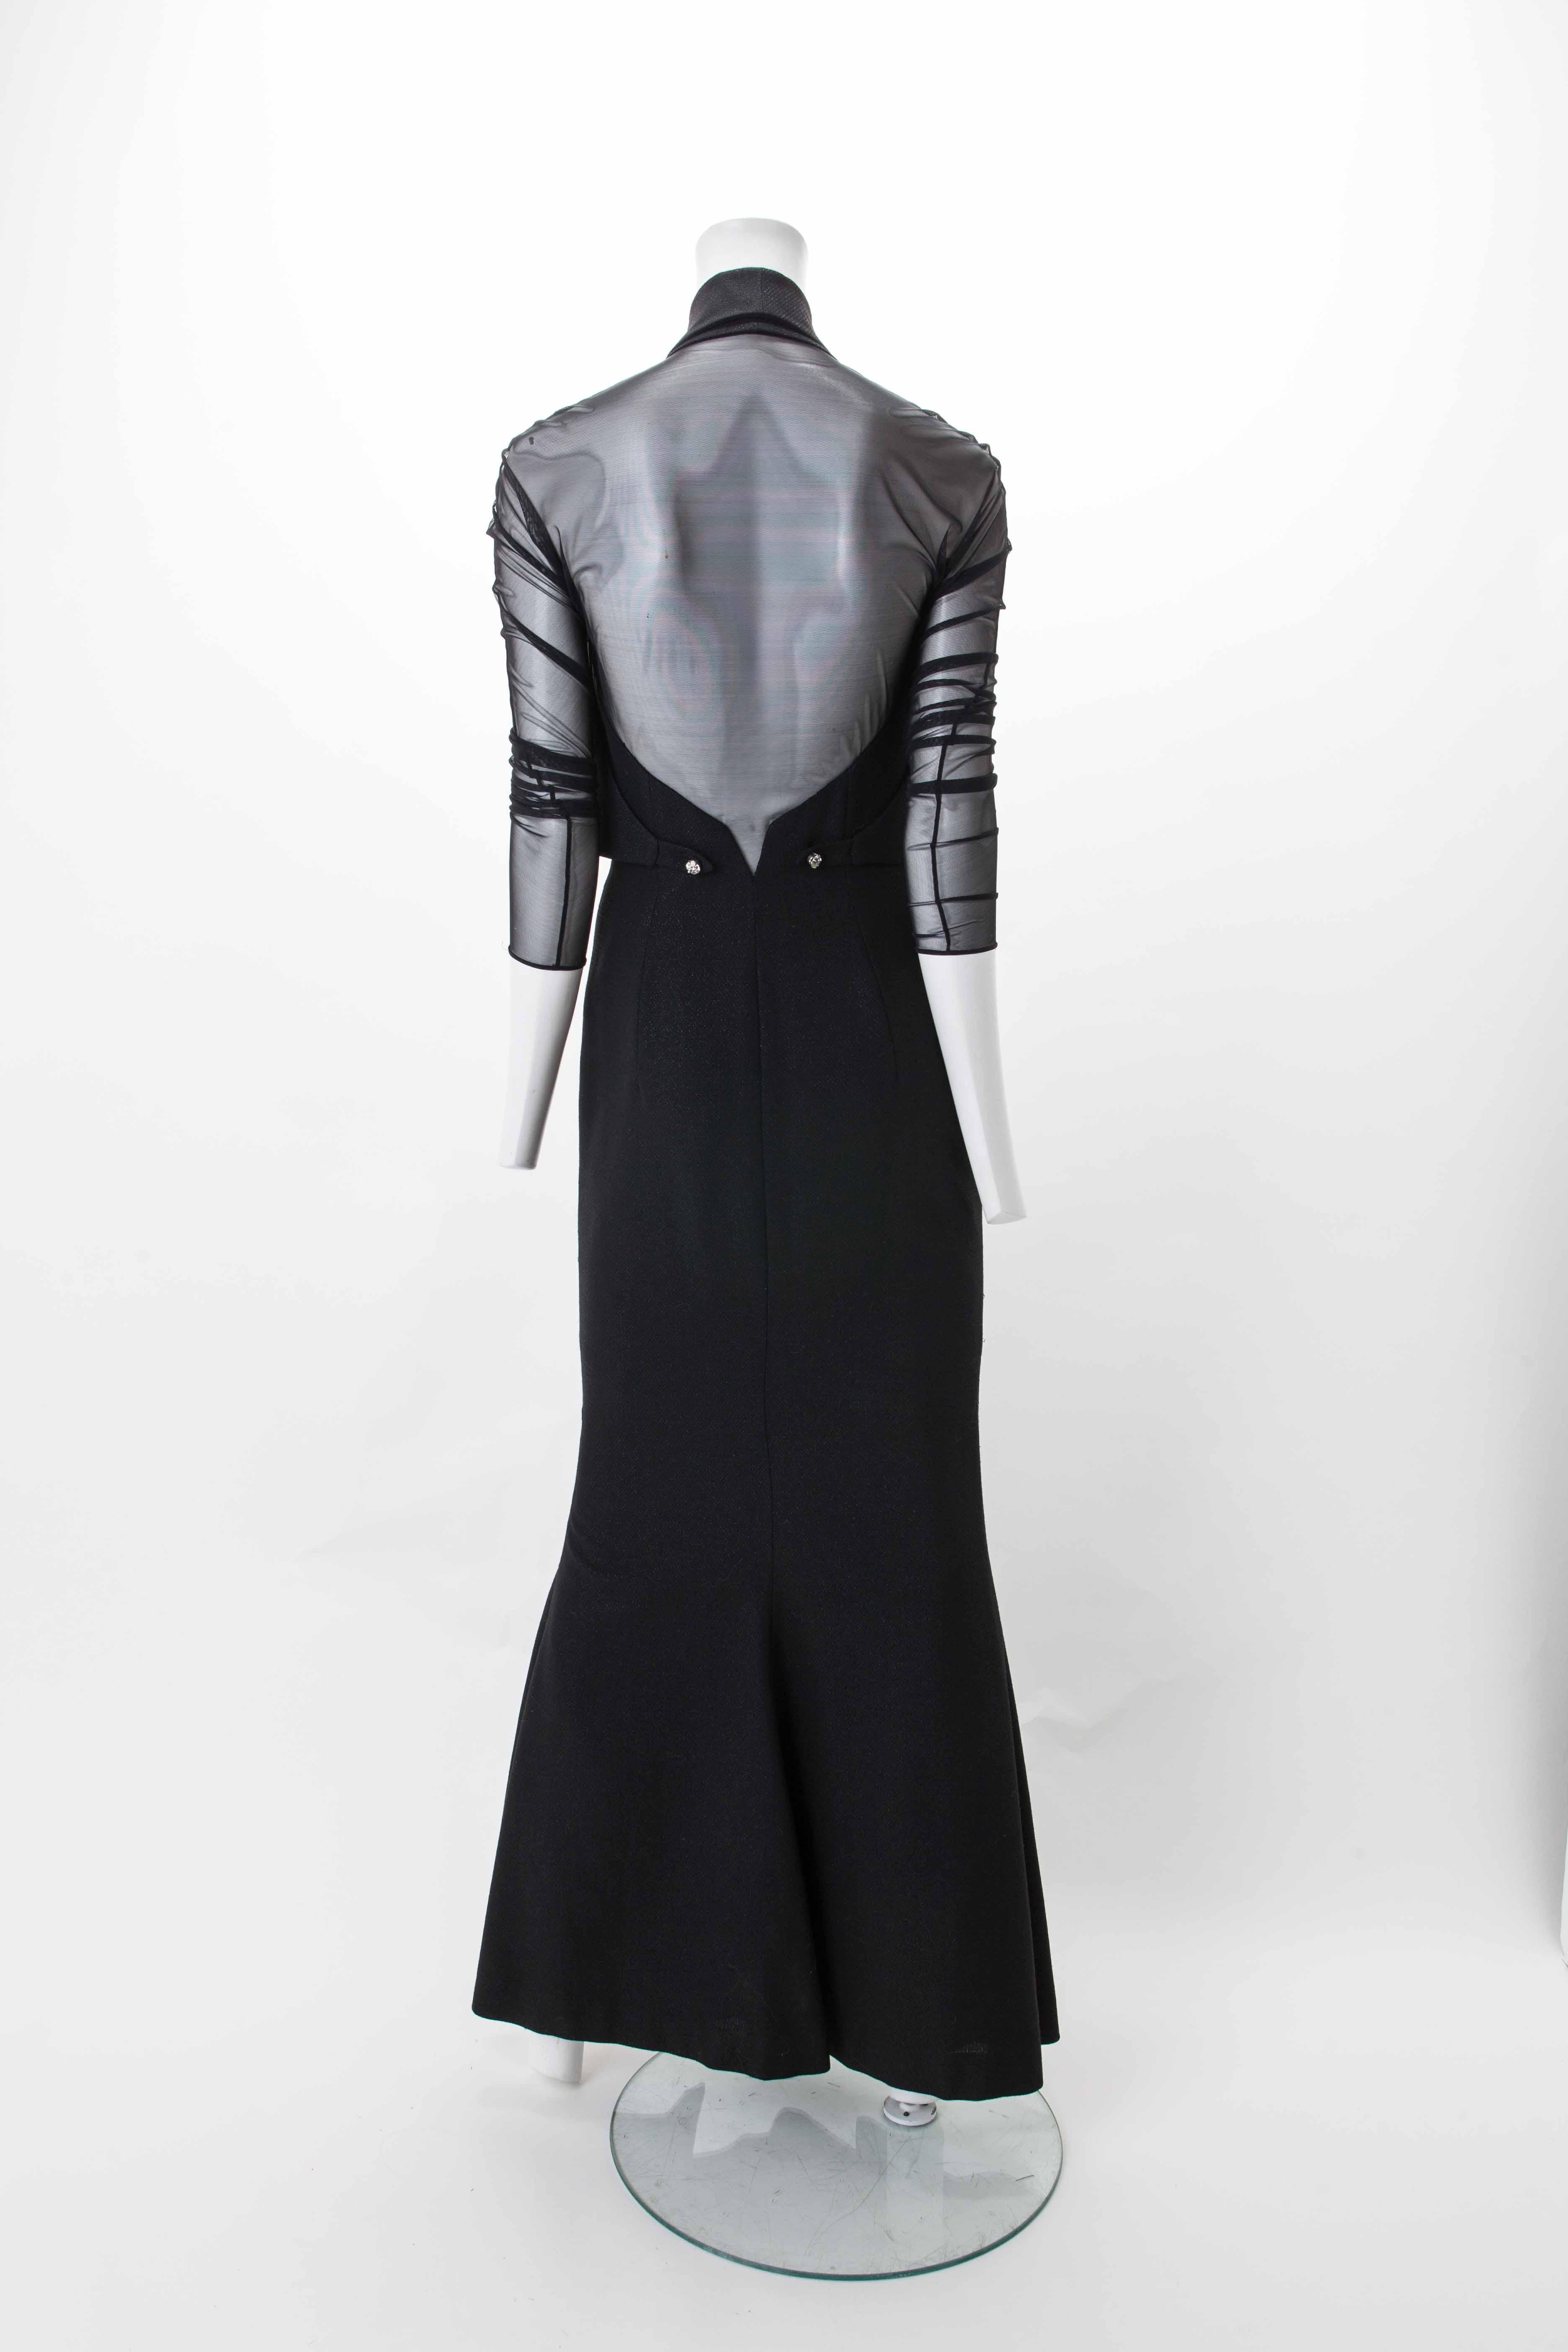 Gianfranco Ferré black gown with sheer sleeves, ca. 1970
Long black wool dress with subtle shimmer featuring waistcoat-style bodice with sheer sleeves. Mermaid skirt features diagonal zipper closure from waist area down to below the knee. Sheer back